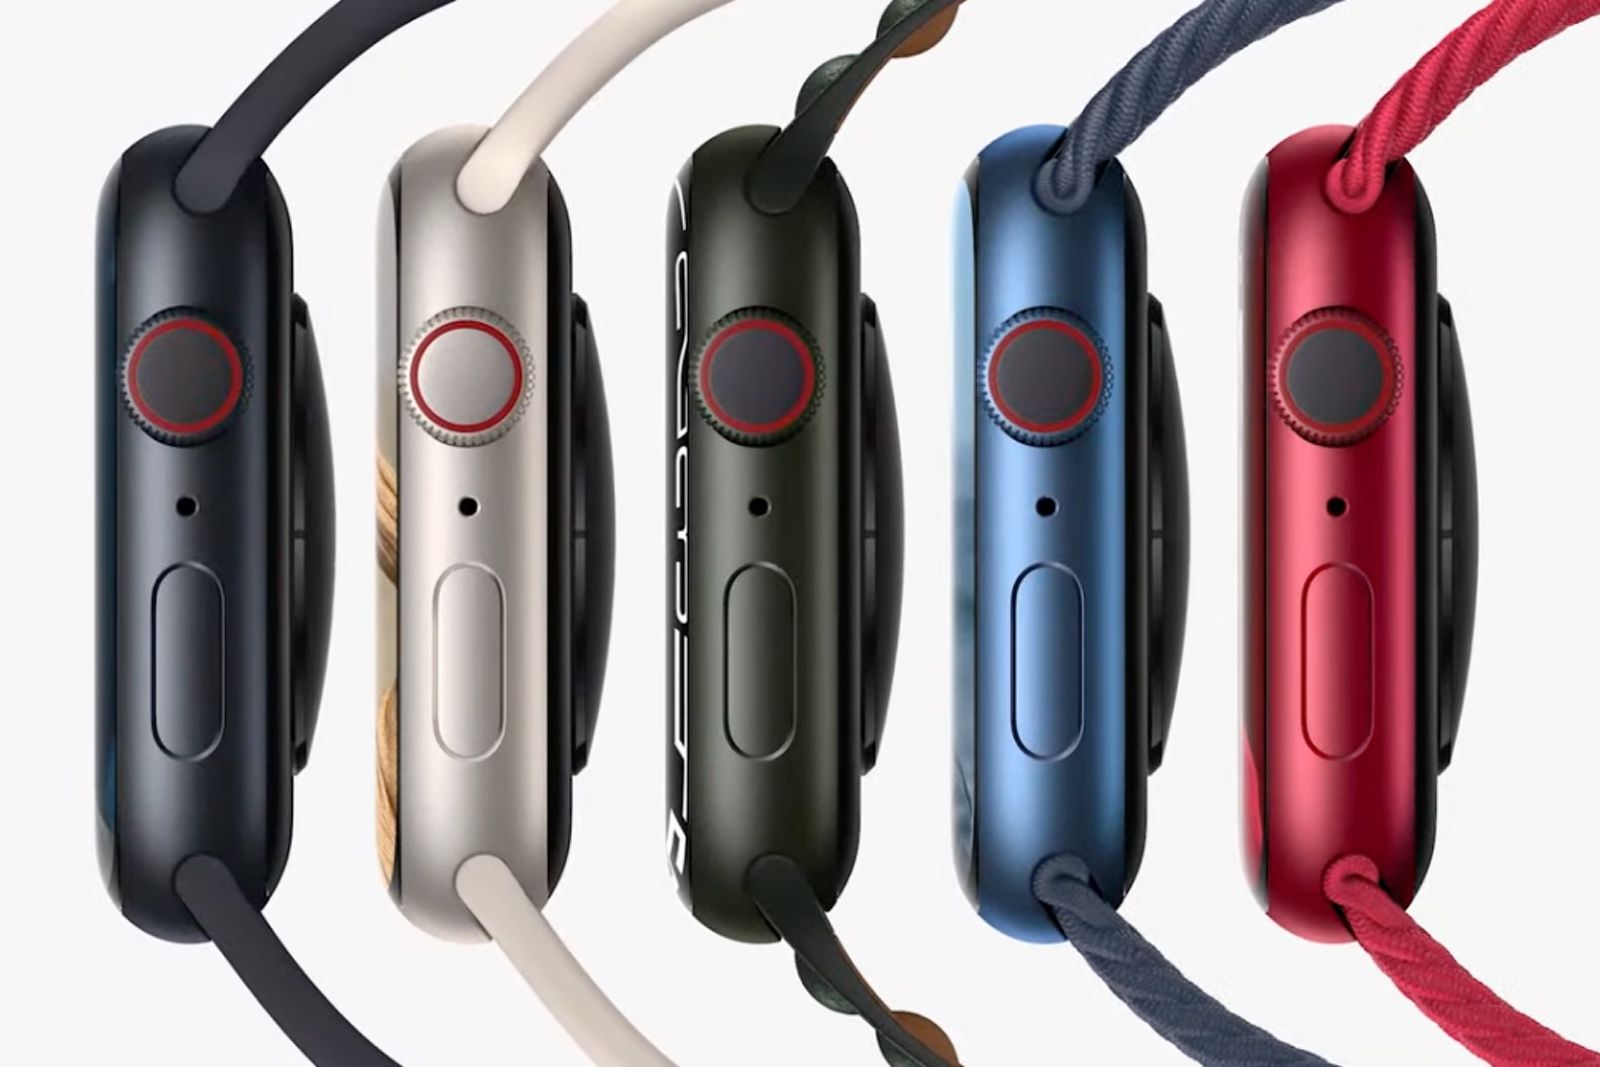 Apple Watch Series 7 colours: All the case finishes and special editions of Apple's latest smartwatch photo 1